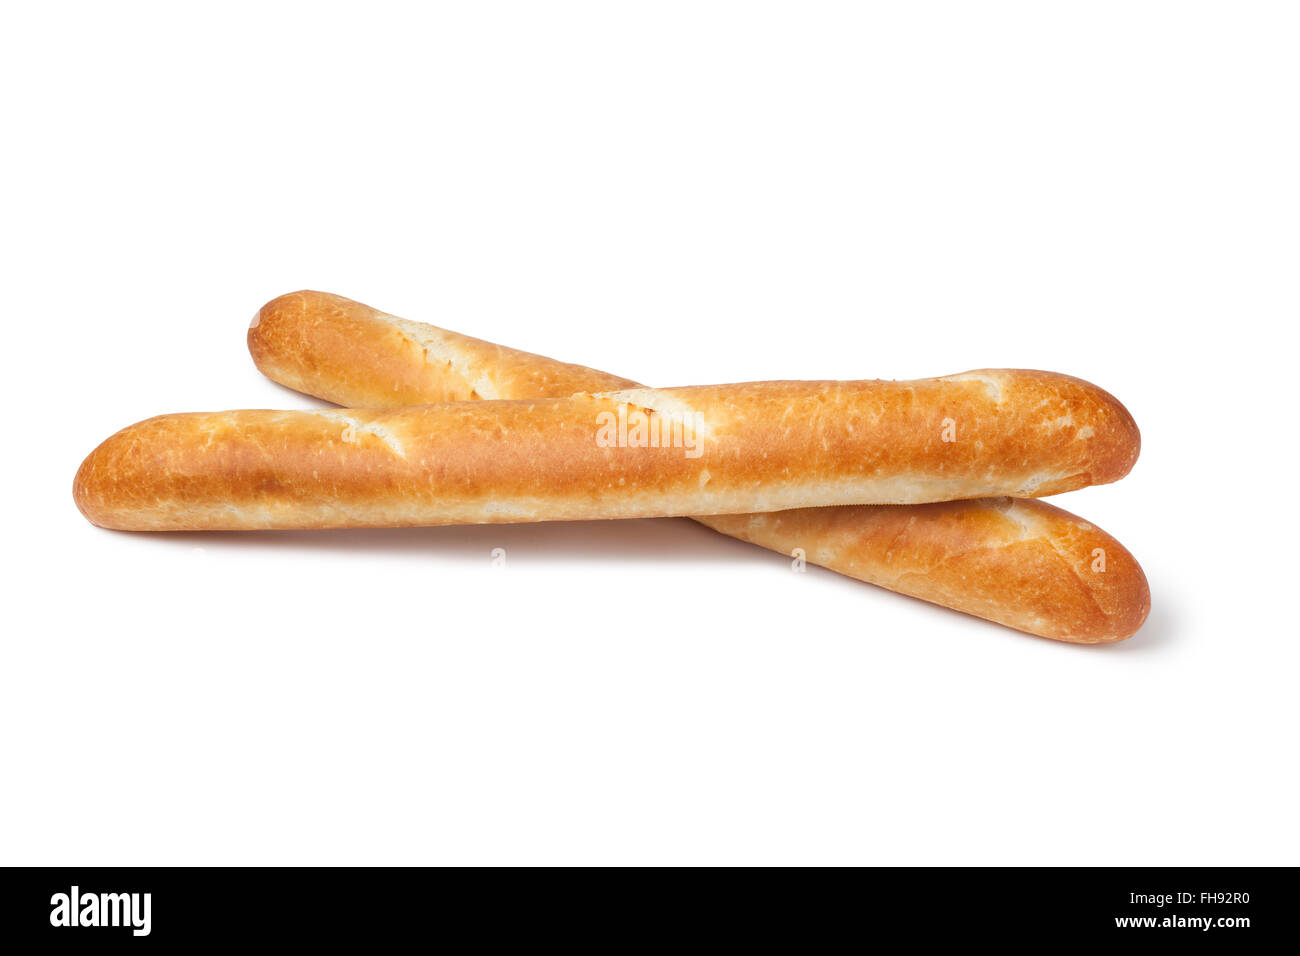 Two whole fresh French bread, baguettes on white background Stock Photo